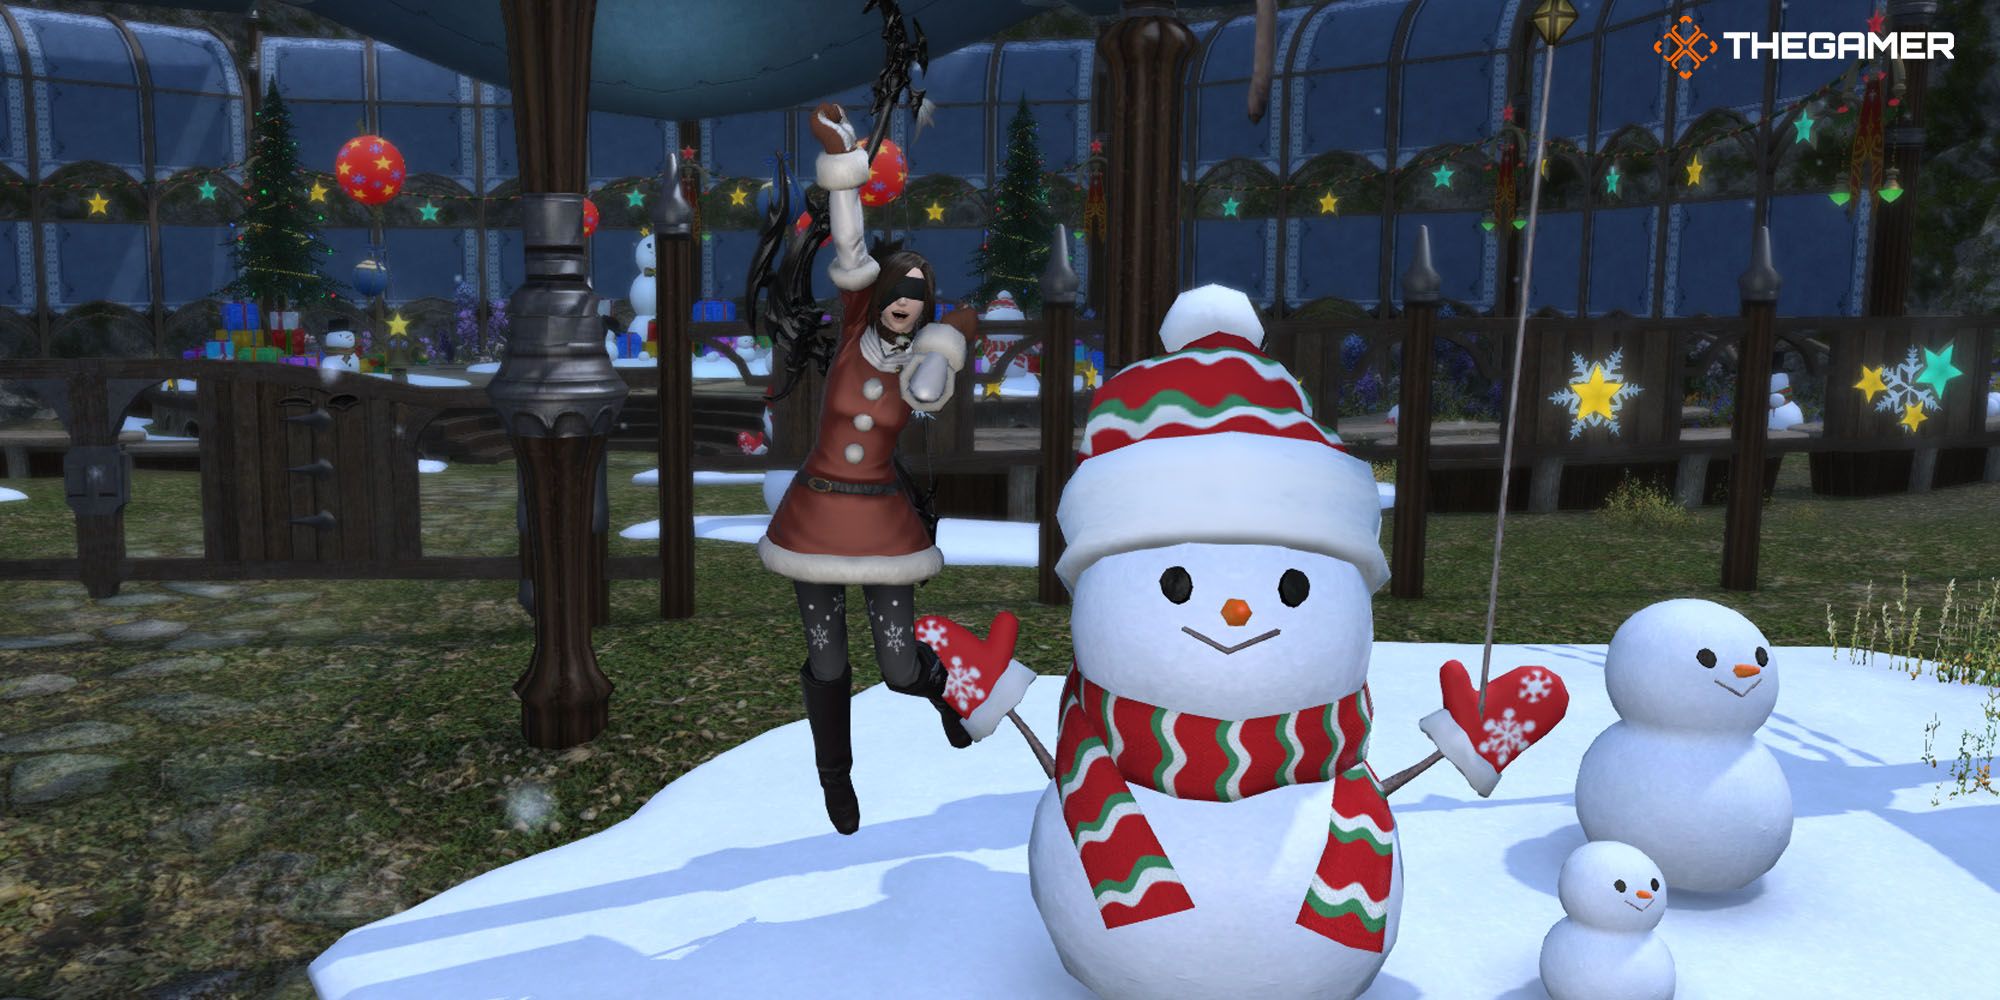 Final Fantasy 14 player in Christmas outfit with snowmen